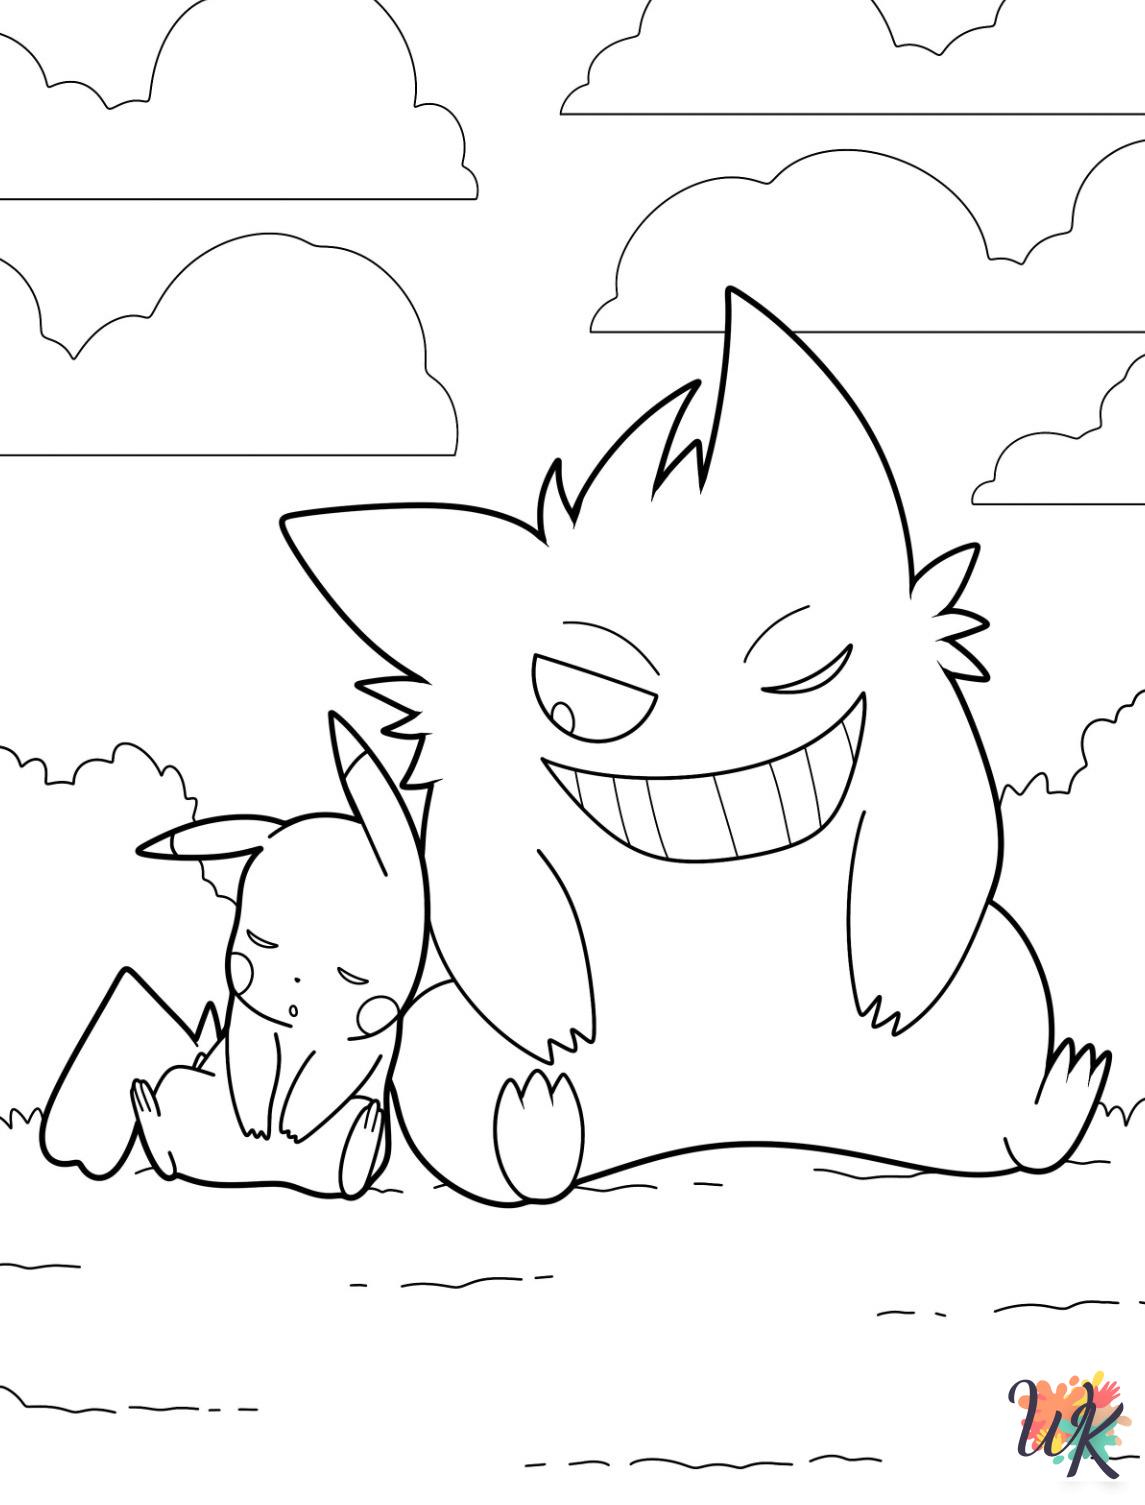 Gengar adult coloring pages